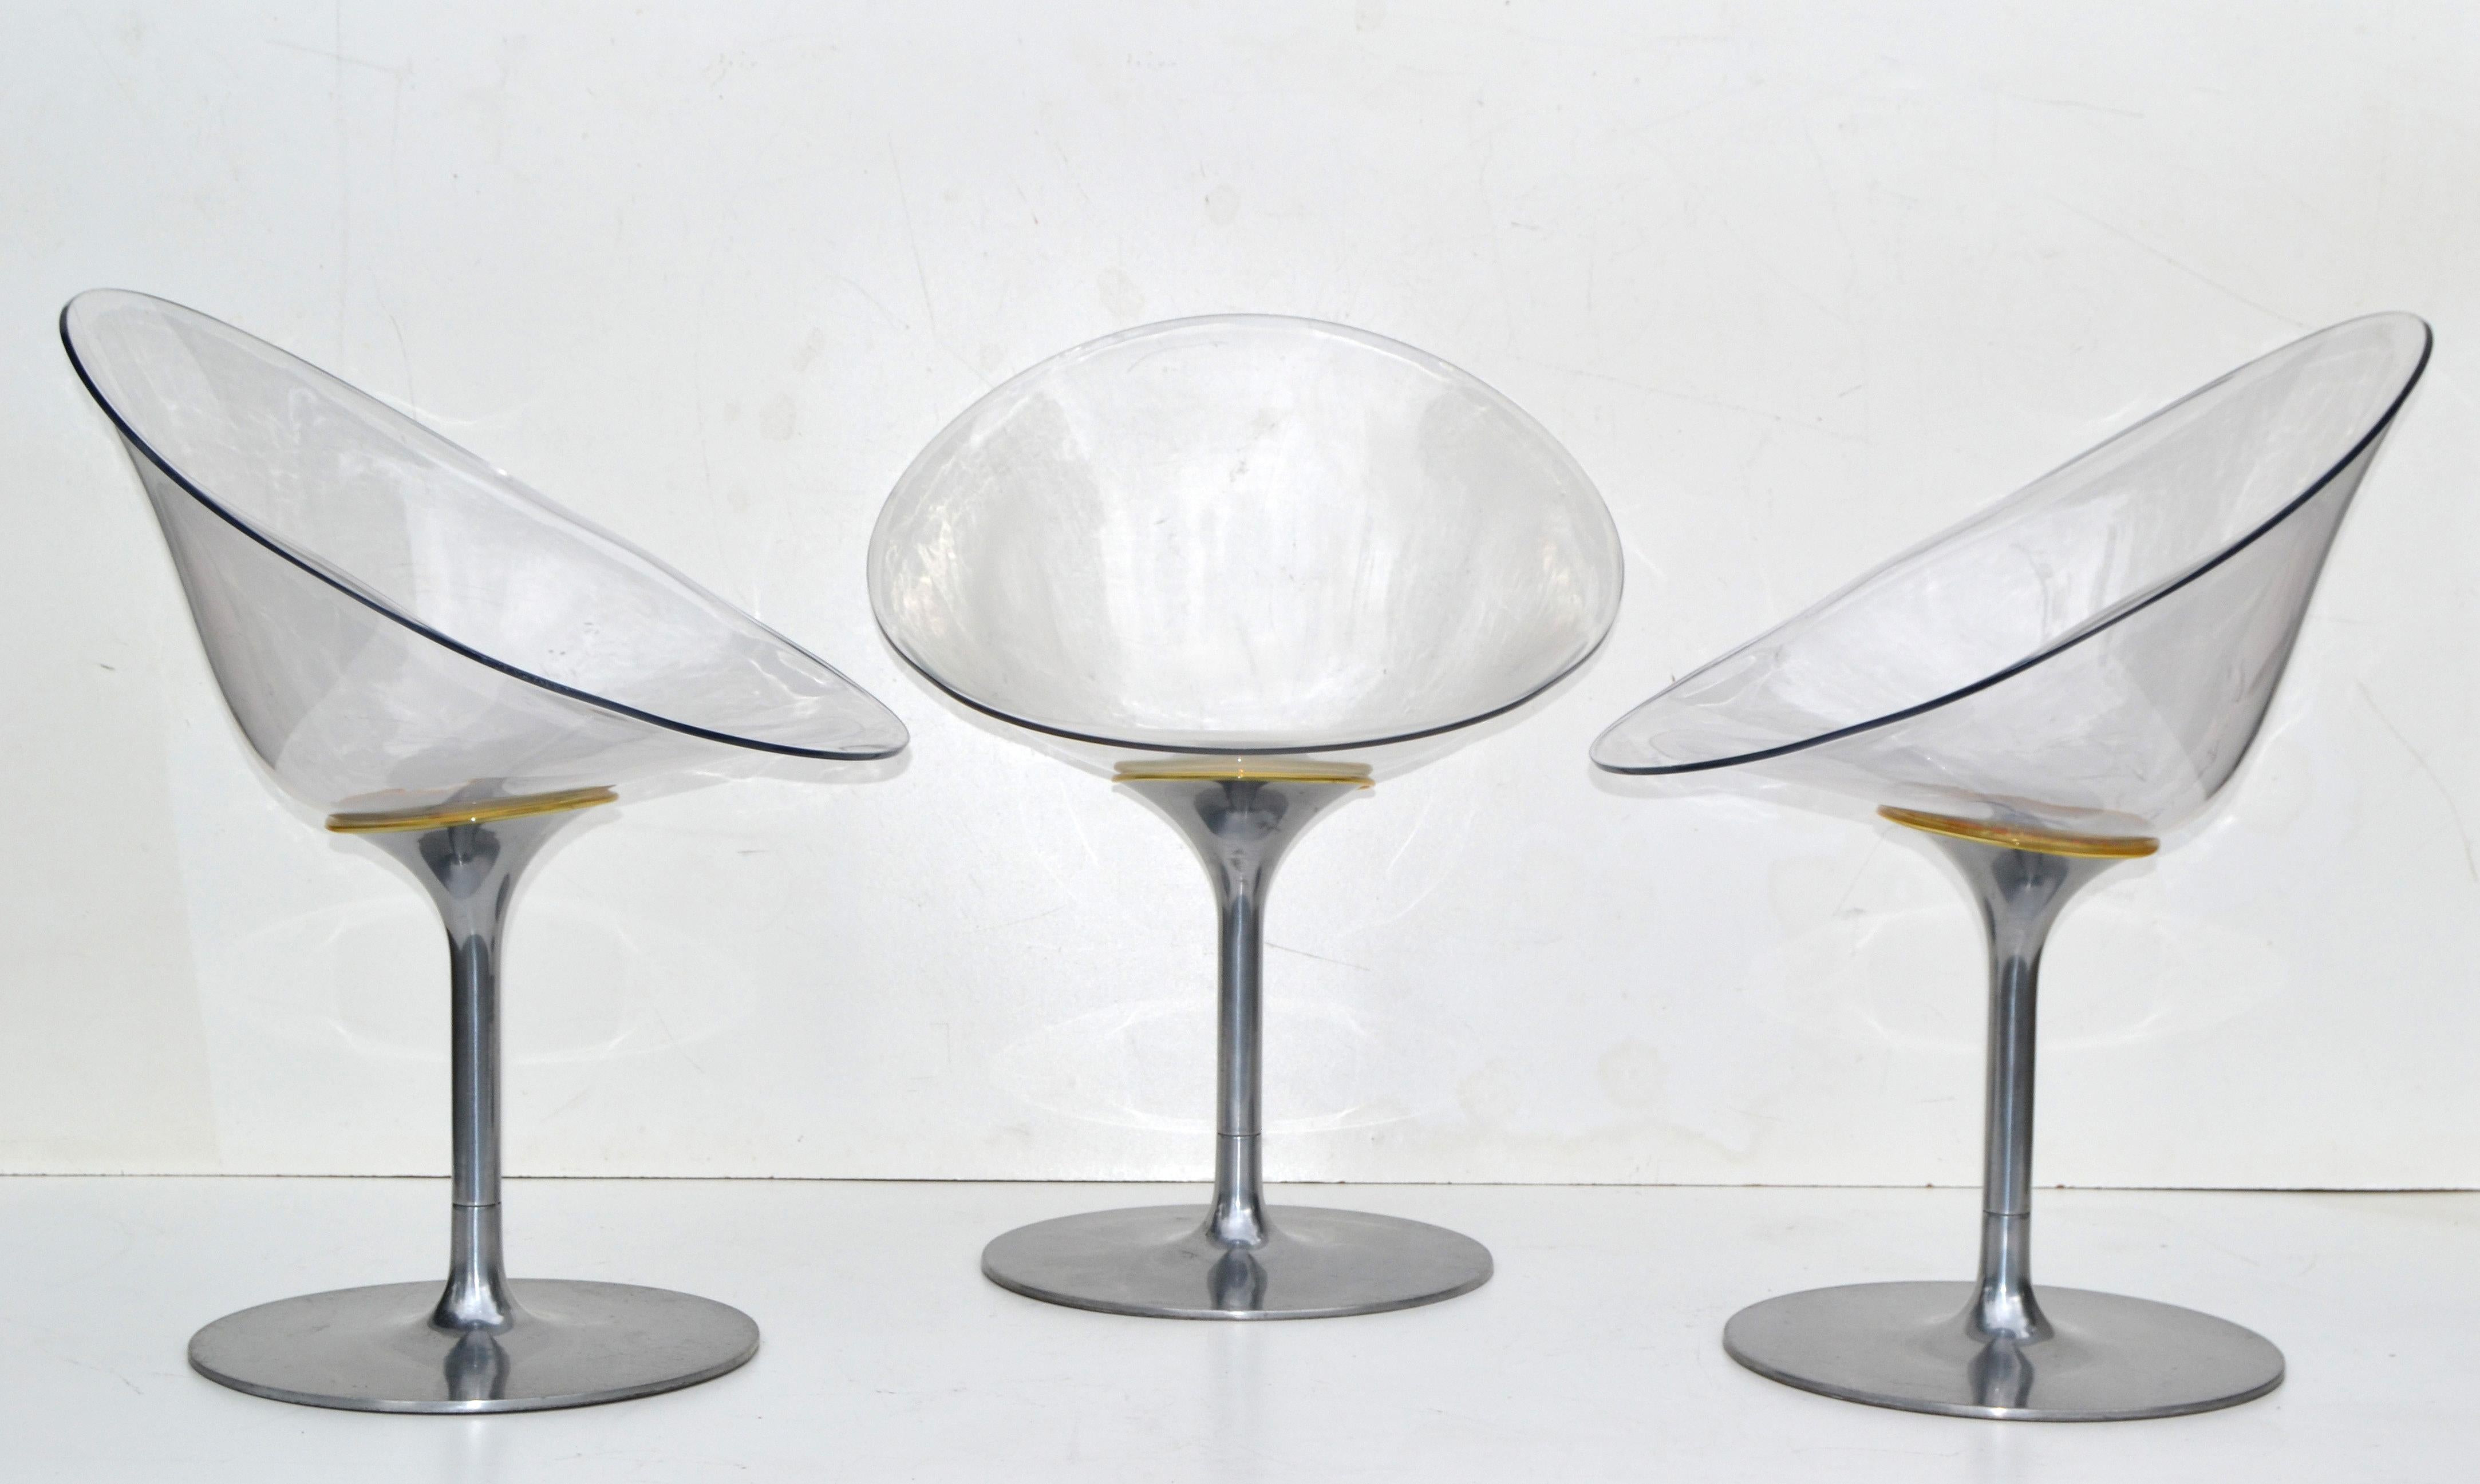 Set of 3 transparent Lucite Eros swivel chairs designed by Philippe Starck for Kartell and made in Italy.
The seat is made out of acrylic and the base is aluminum.
Marked at the seat.
The swivel function works smoothly.